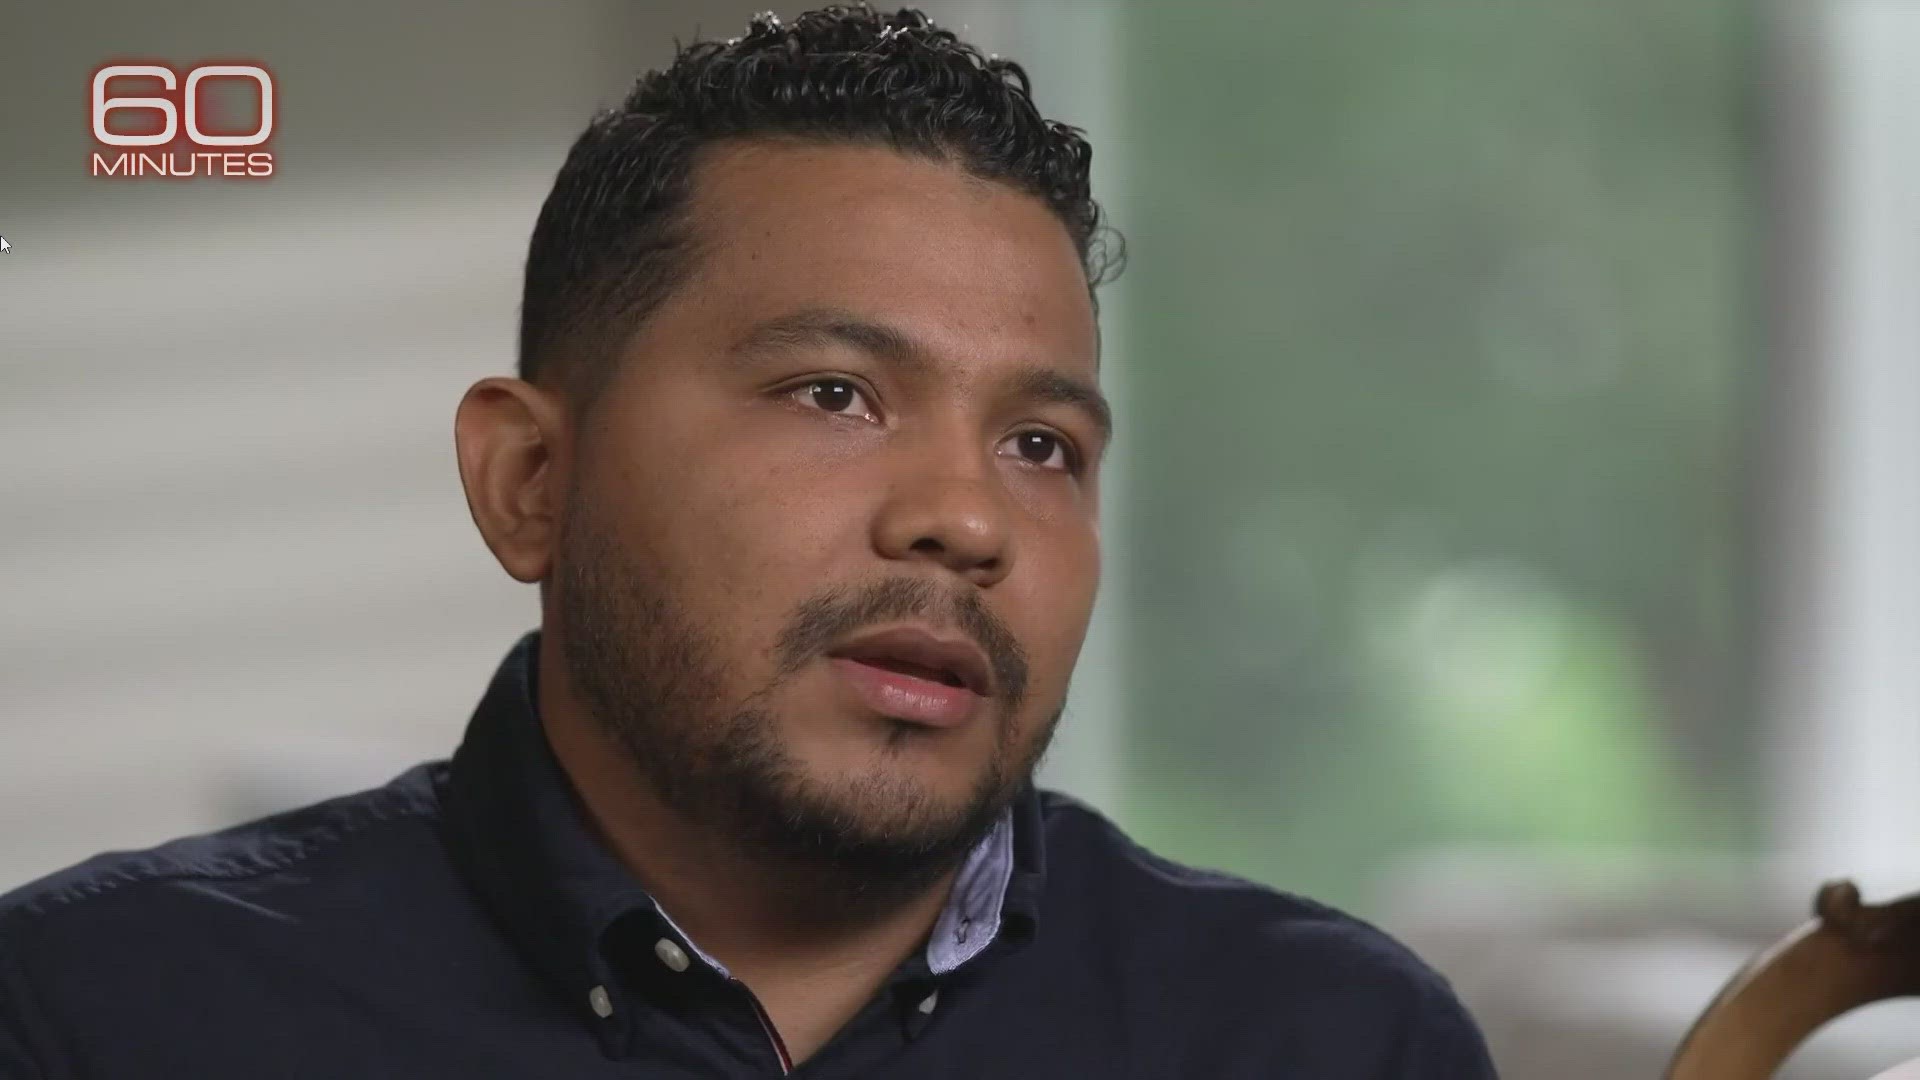 One of the migrants flown from San Antonio to Martha's Vineyard last year is speaking out for the first time in a new CBS report.